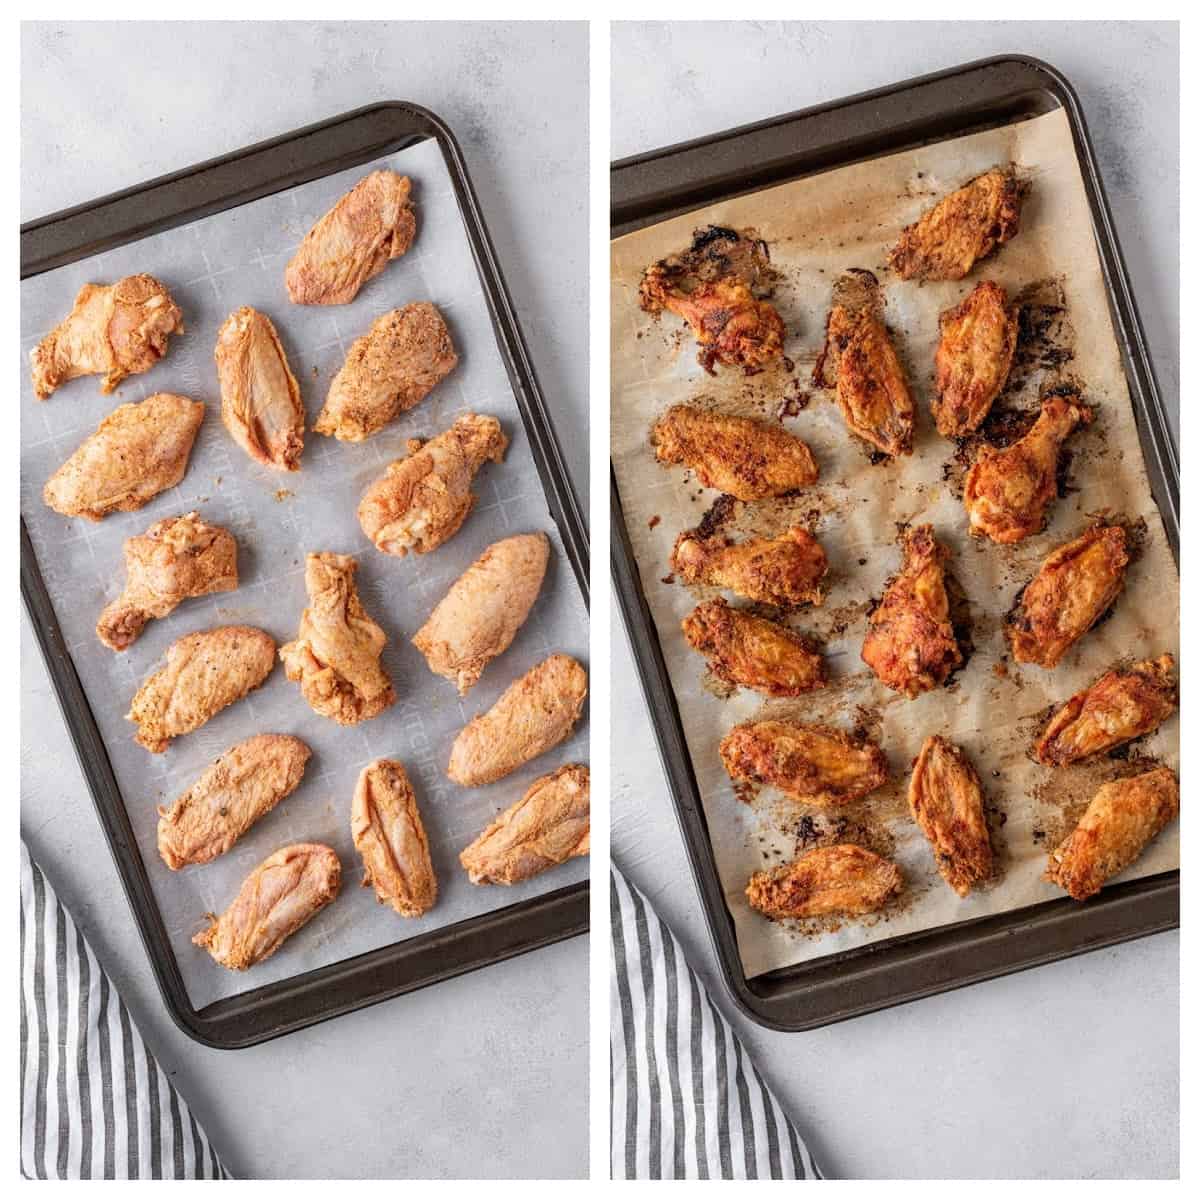 a side by side photo of the chicken wings on a parchment lined baking sheet before and after they are cooked